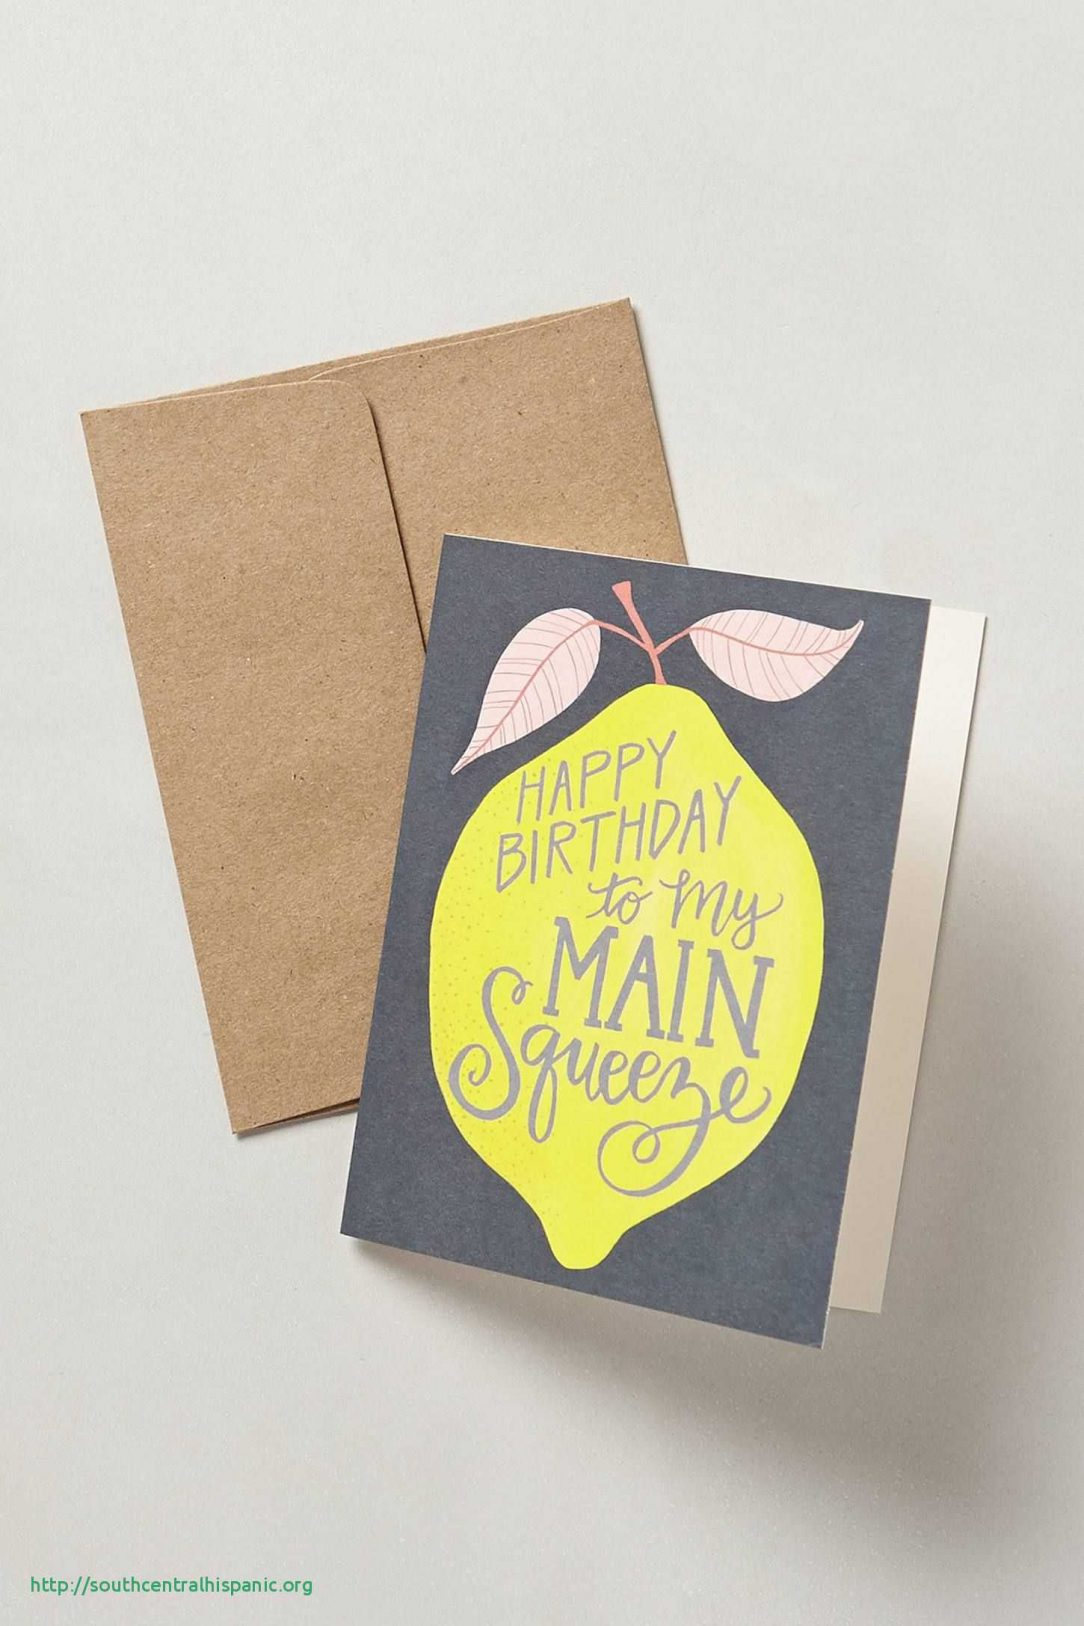 Homemade Birthday Card Ideas For Dad Funny Birthday Card Ideas For Dad From Daughter Homemade Happy